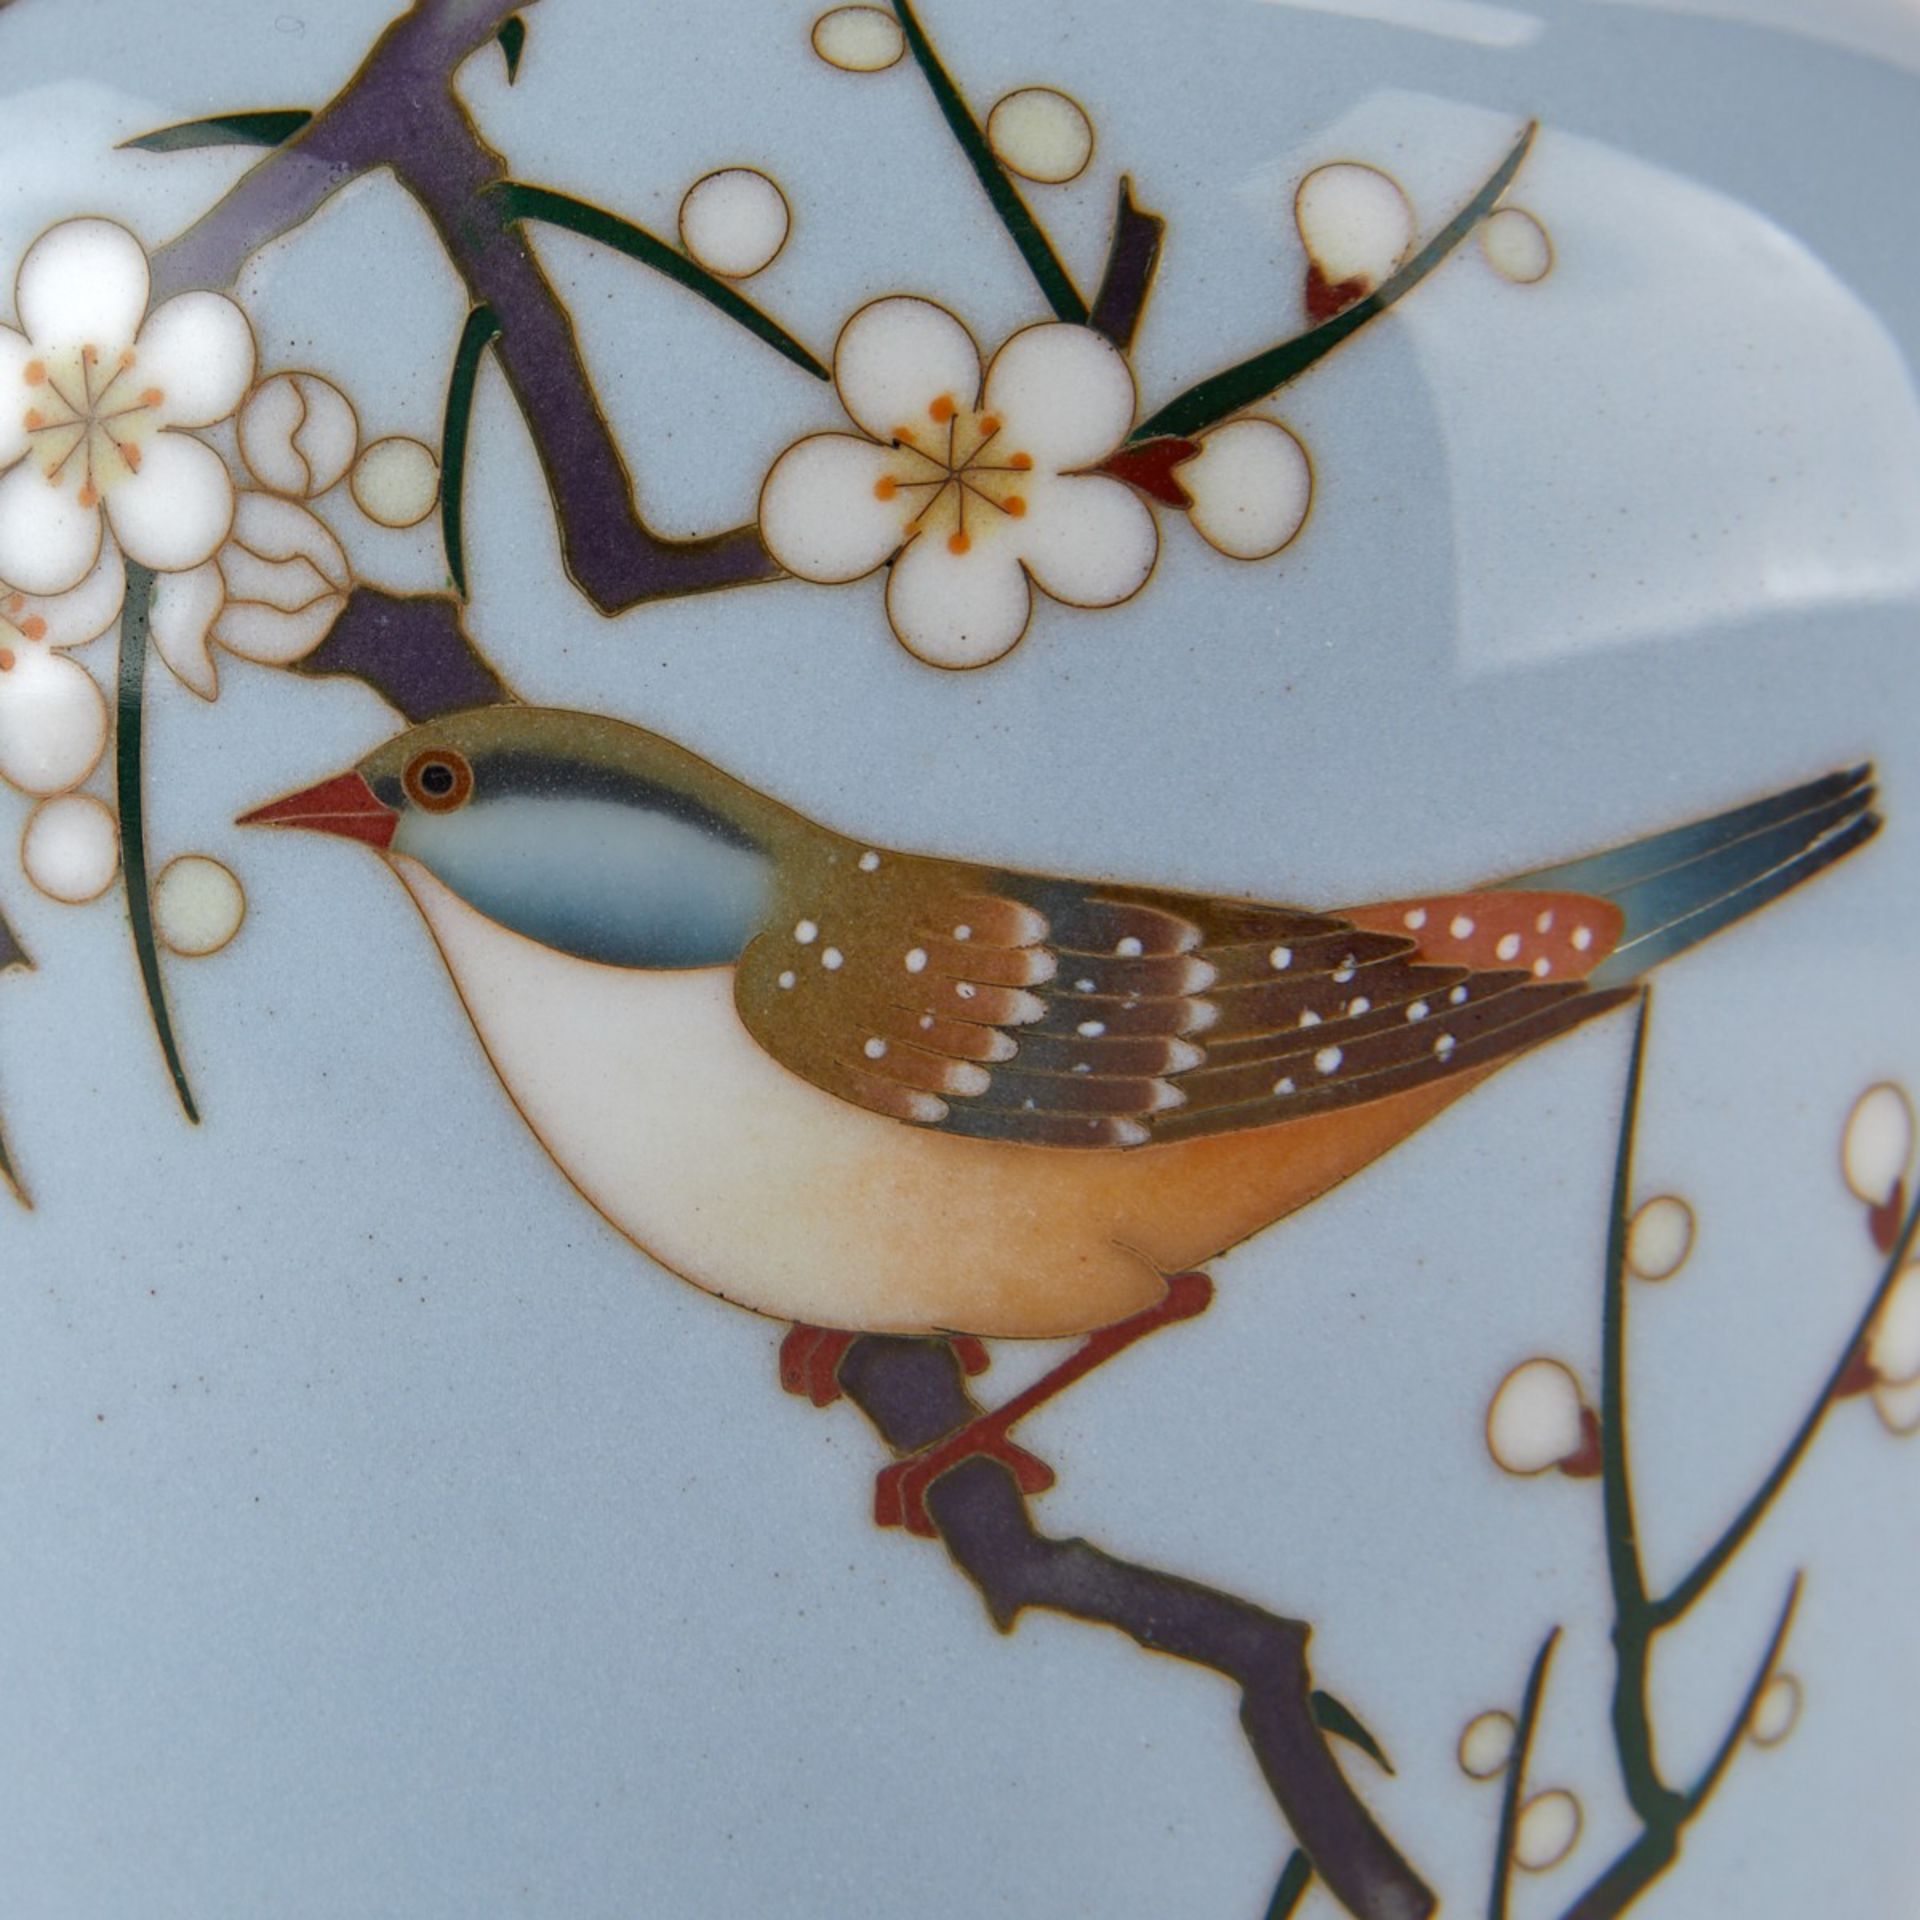 Japanese Cloisonne Vase w/ Cherry Blossoms and Bird - Image 4 of 5